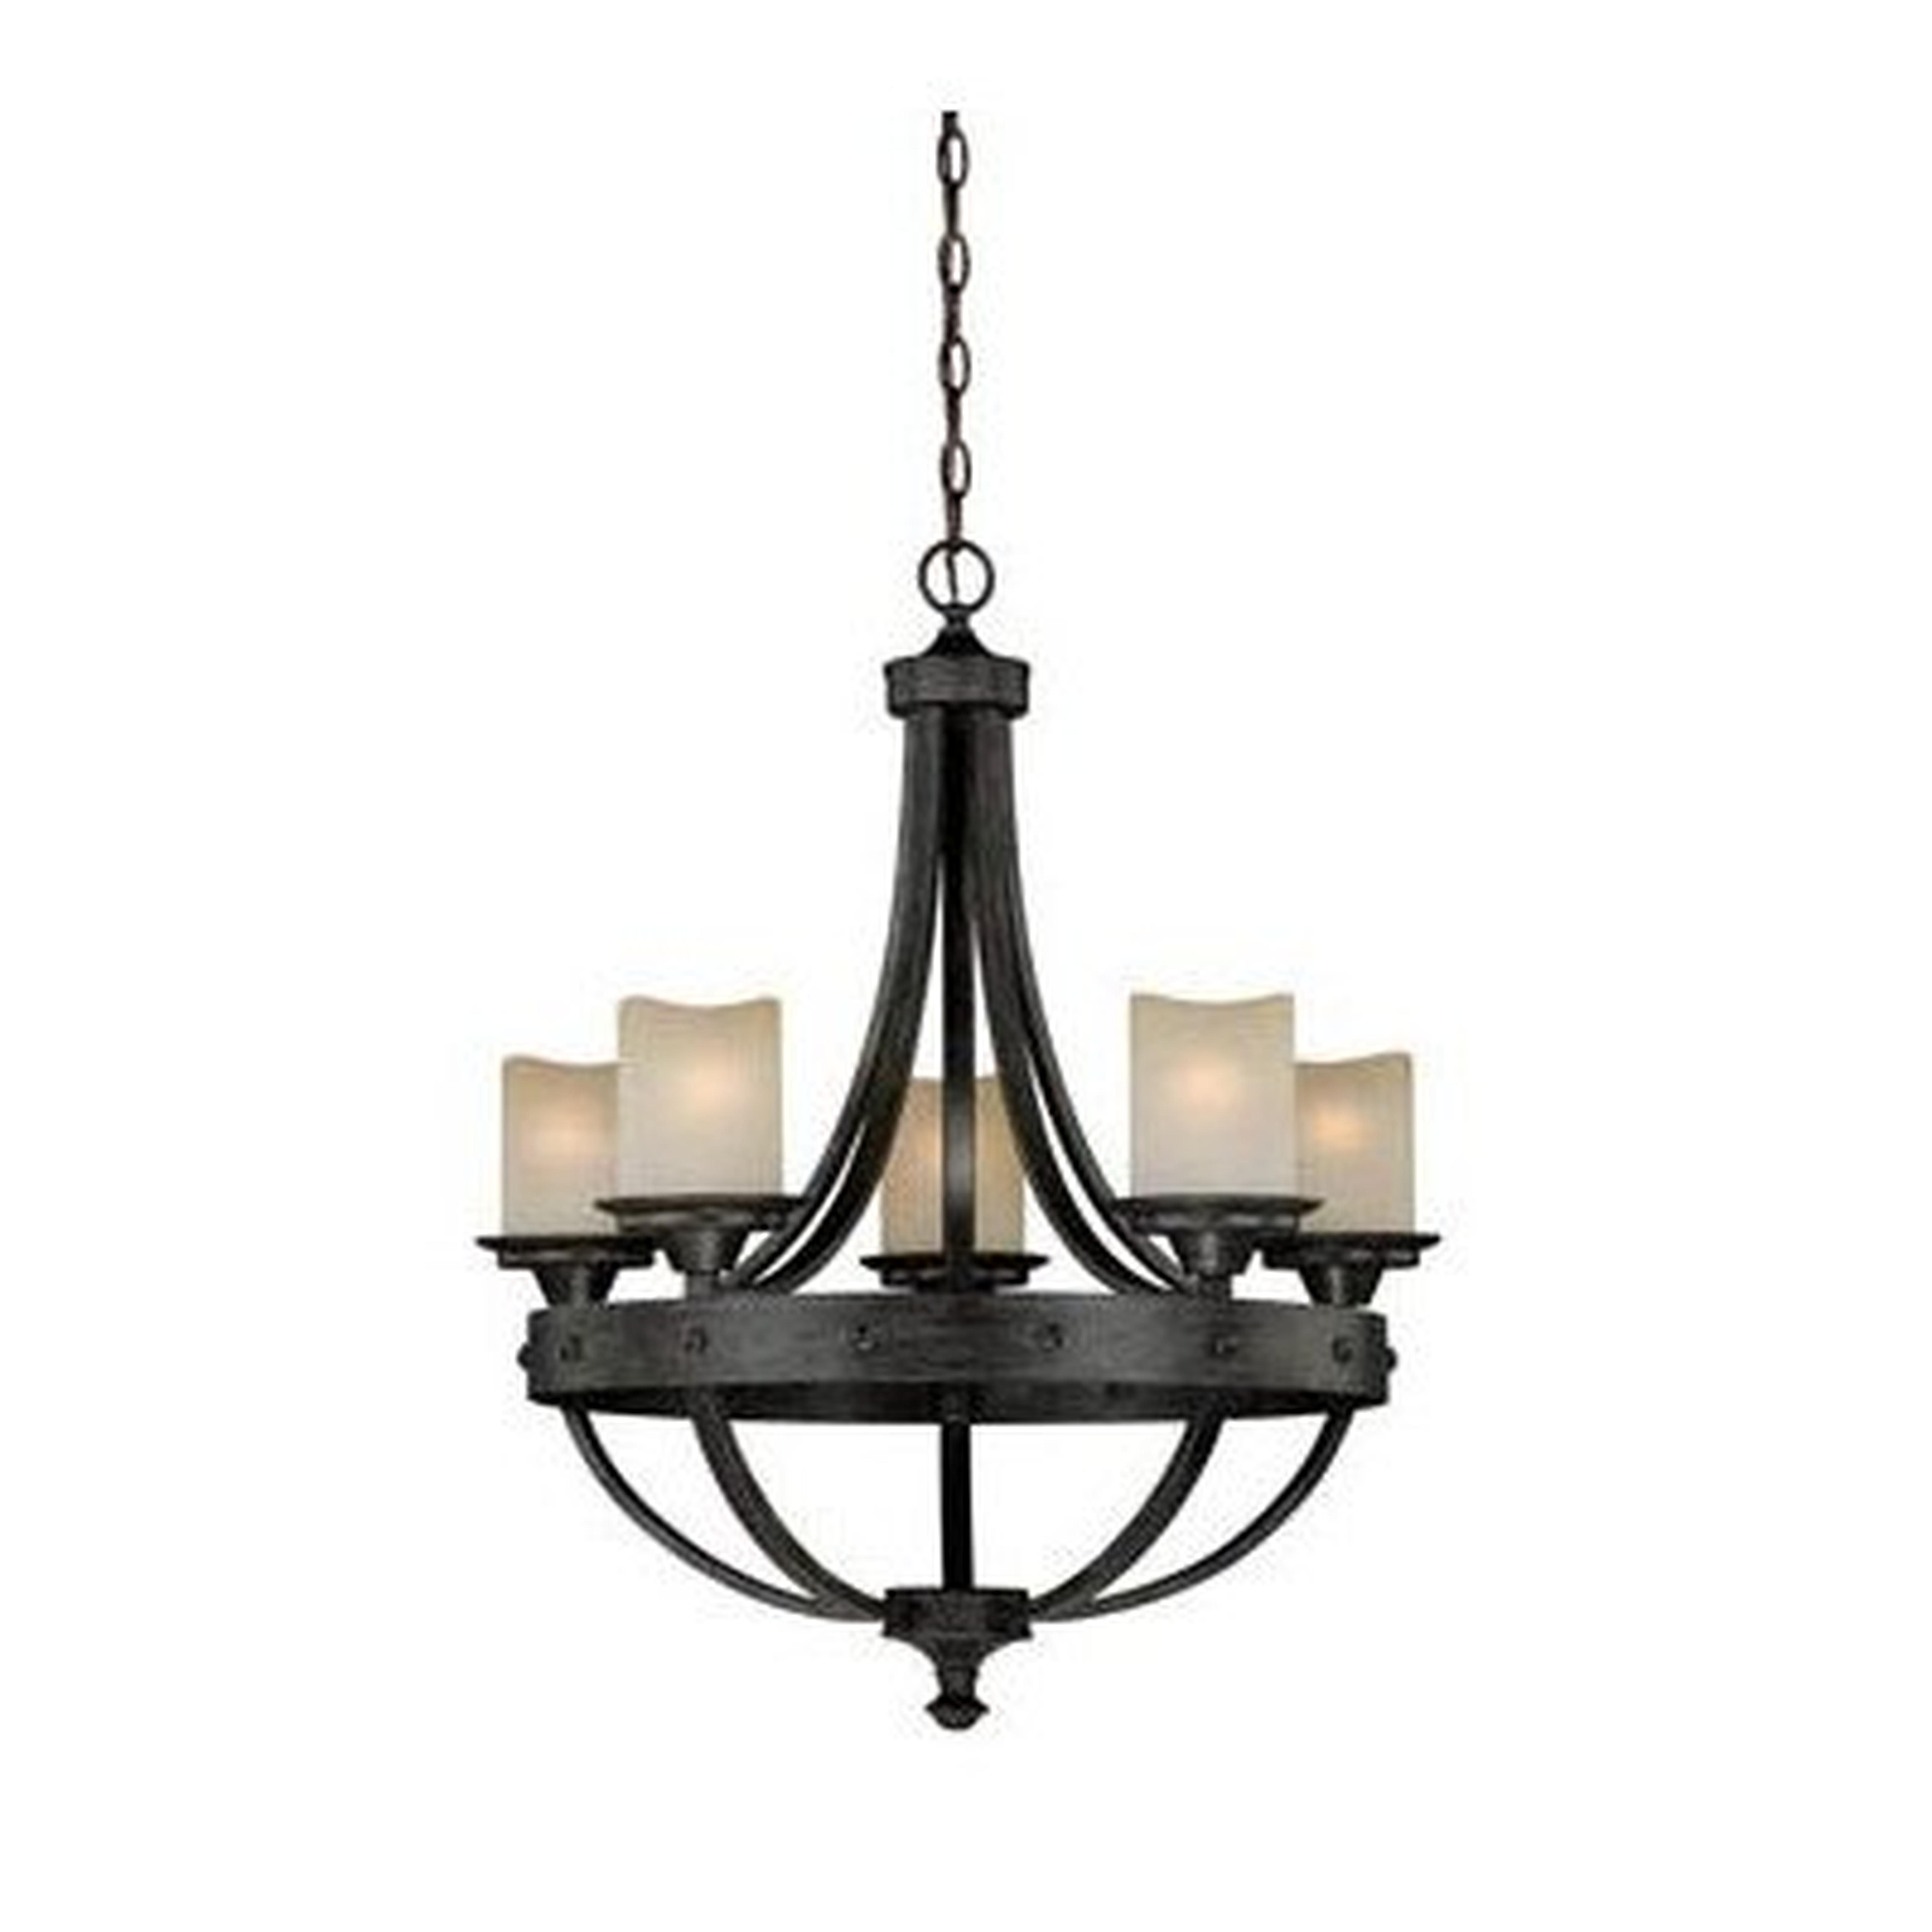 Galyon 5-Light Candle-Style Chandelier - Wayfair